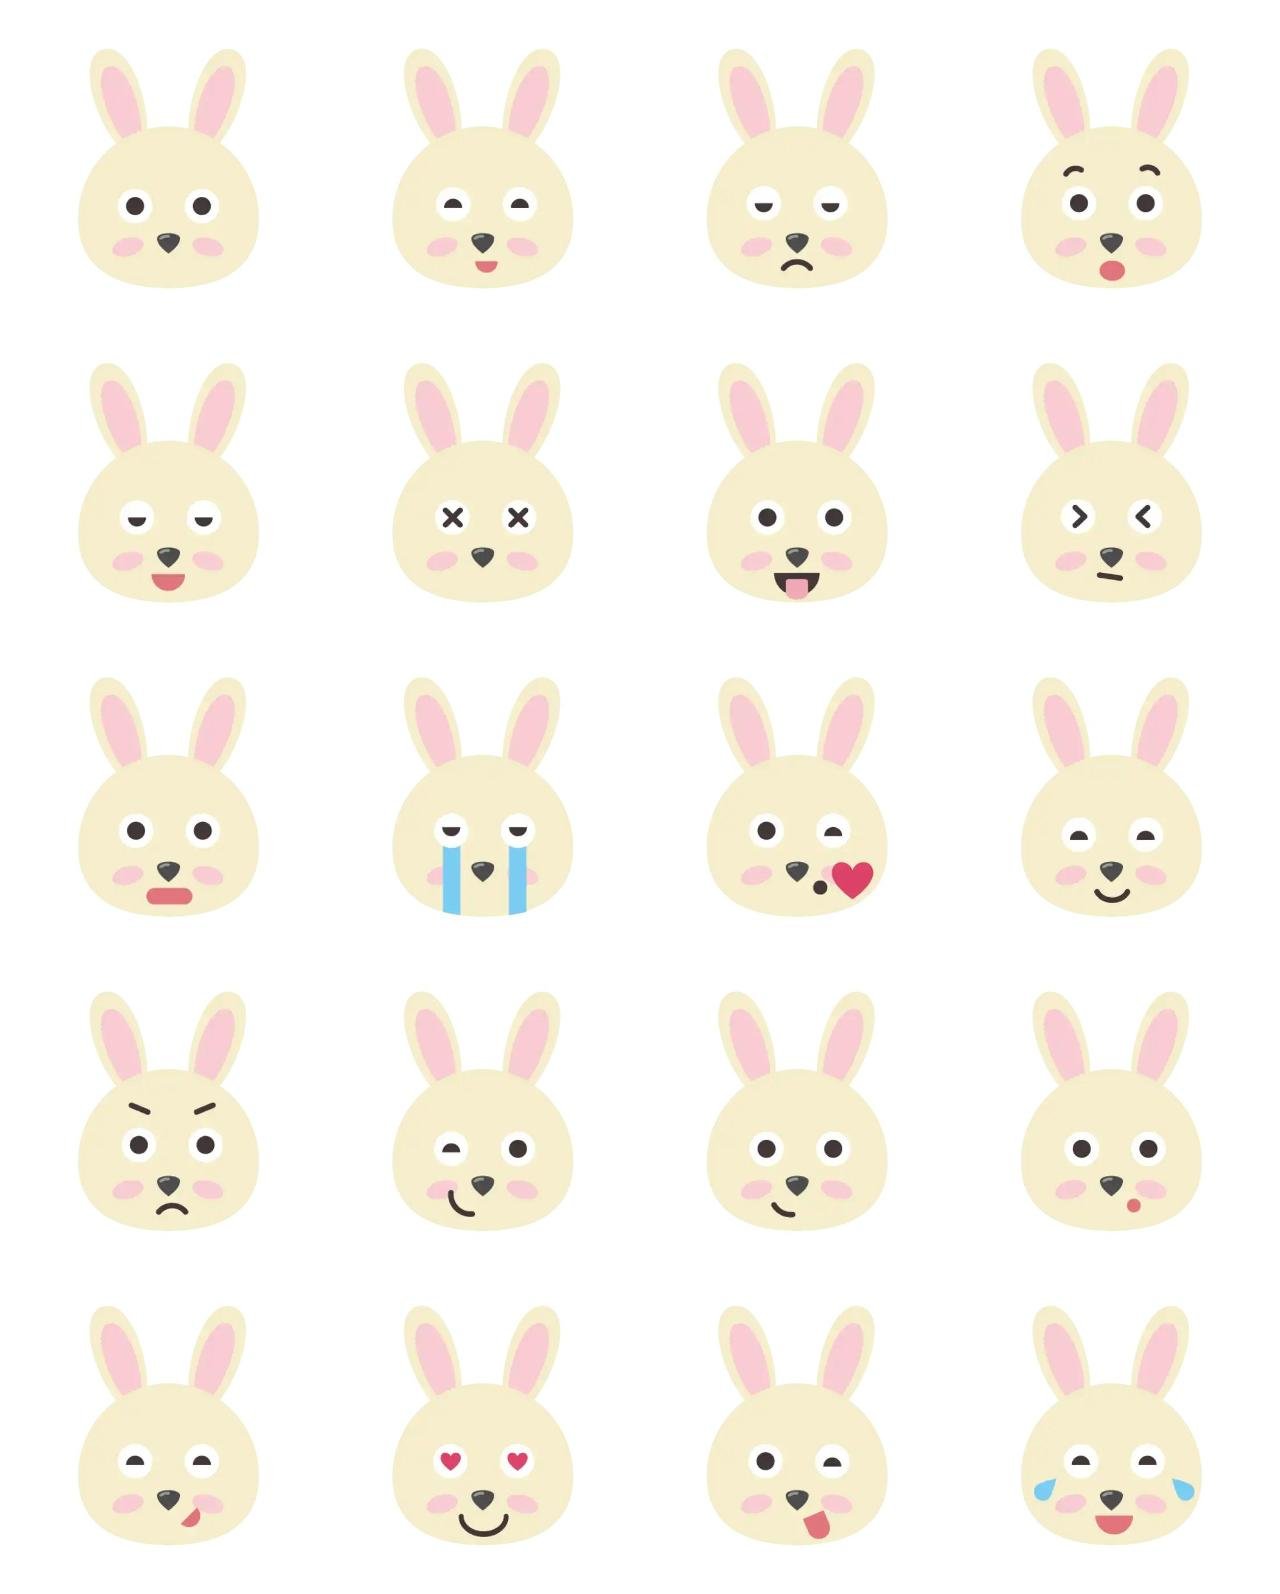 undefined Animation/Cartoon,Animals sticker pack for Whatsapp, Telegram, Signal, and others chatting and message apps